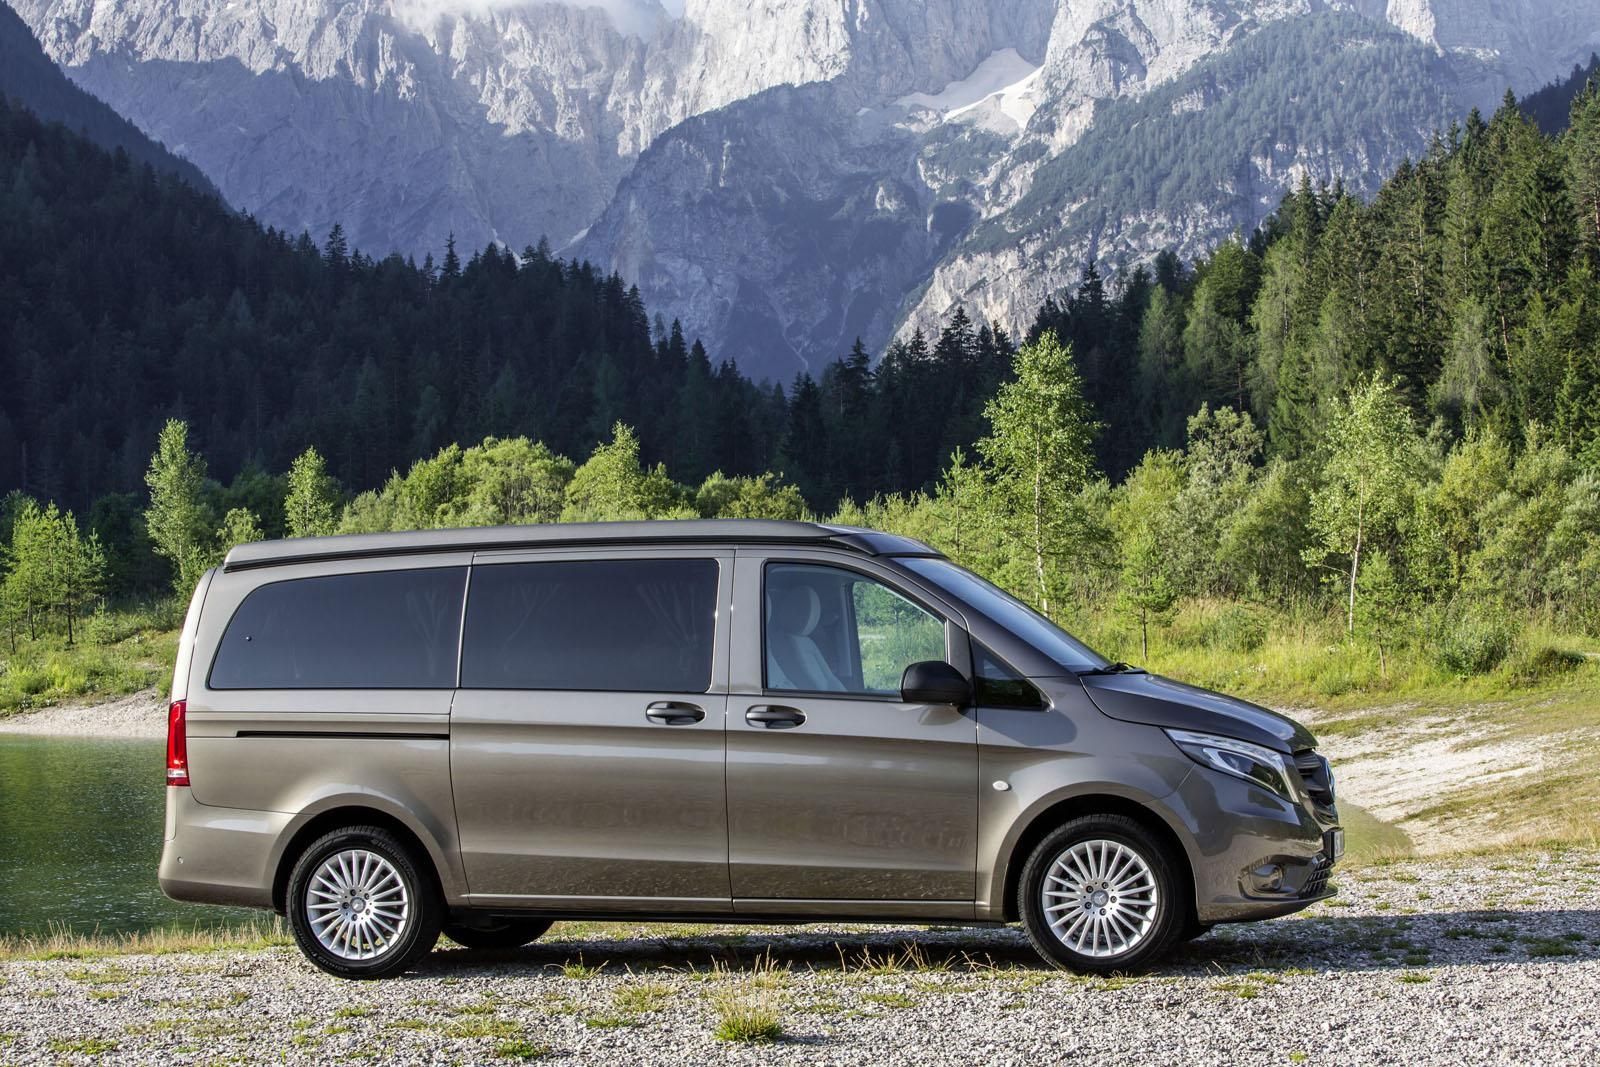 MERCEDES VTO MARCO POLO RESM GALERS